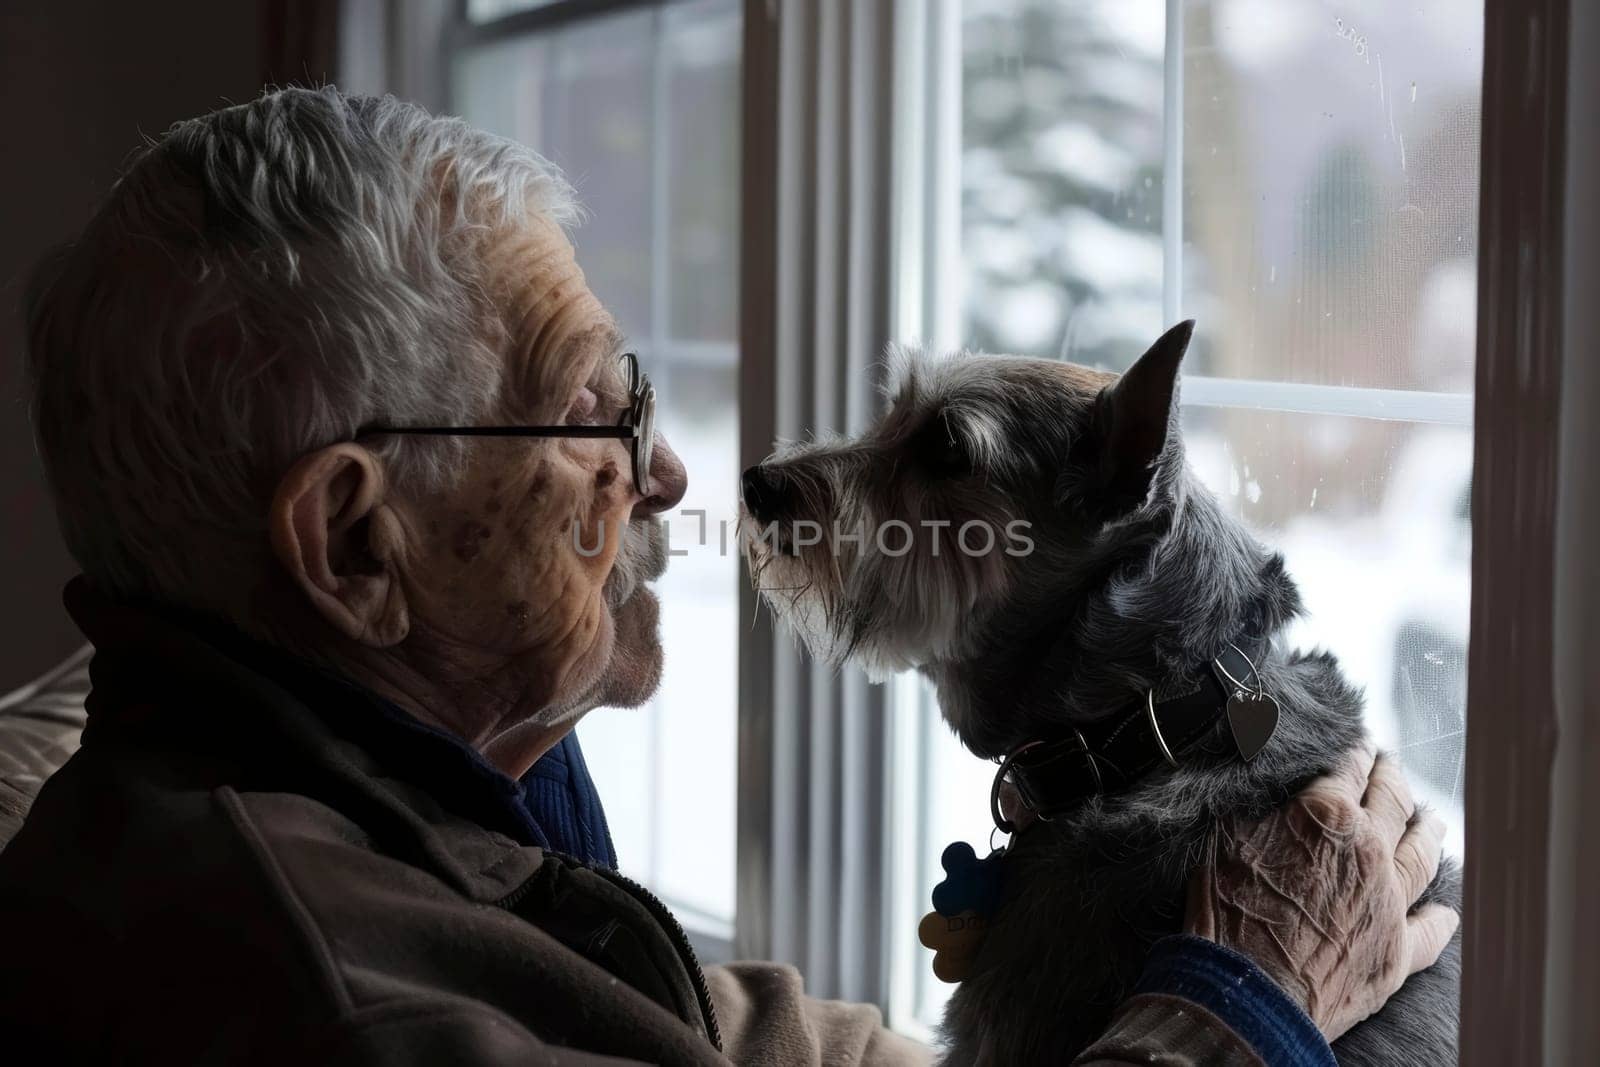 An elderly individual and a dog share a serene moment looking out the window together. The golden light casts a nostalgic glow, reflecting a quiet companionship